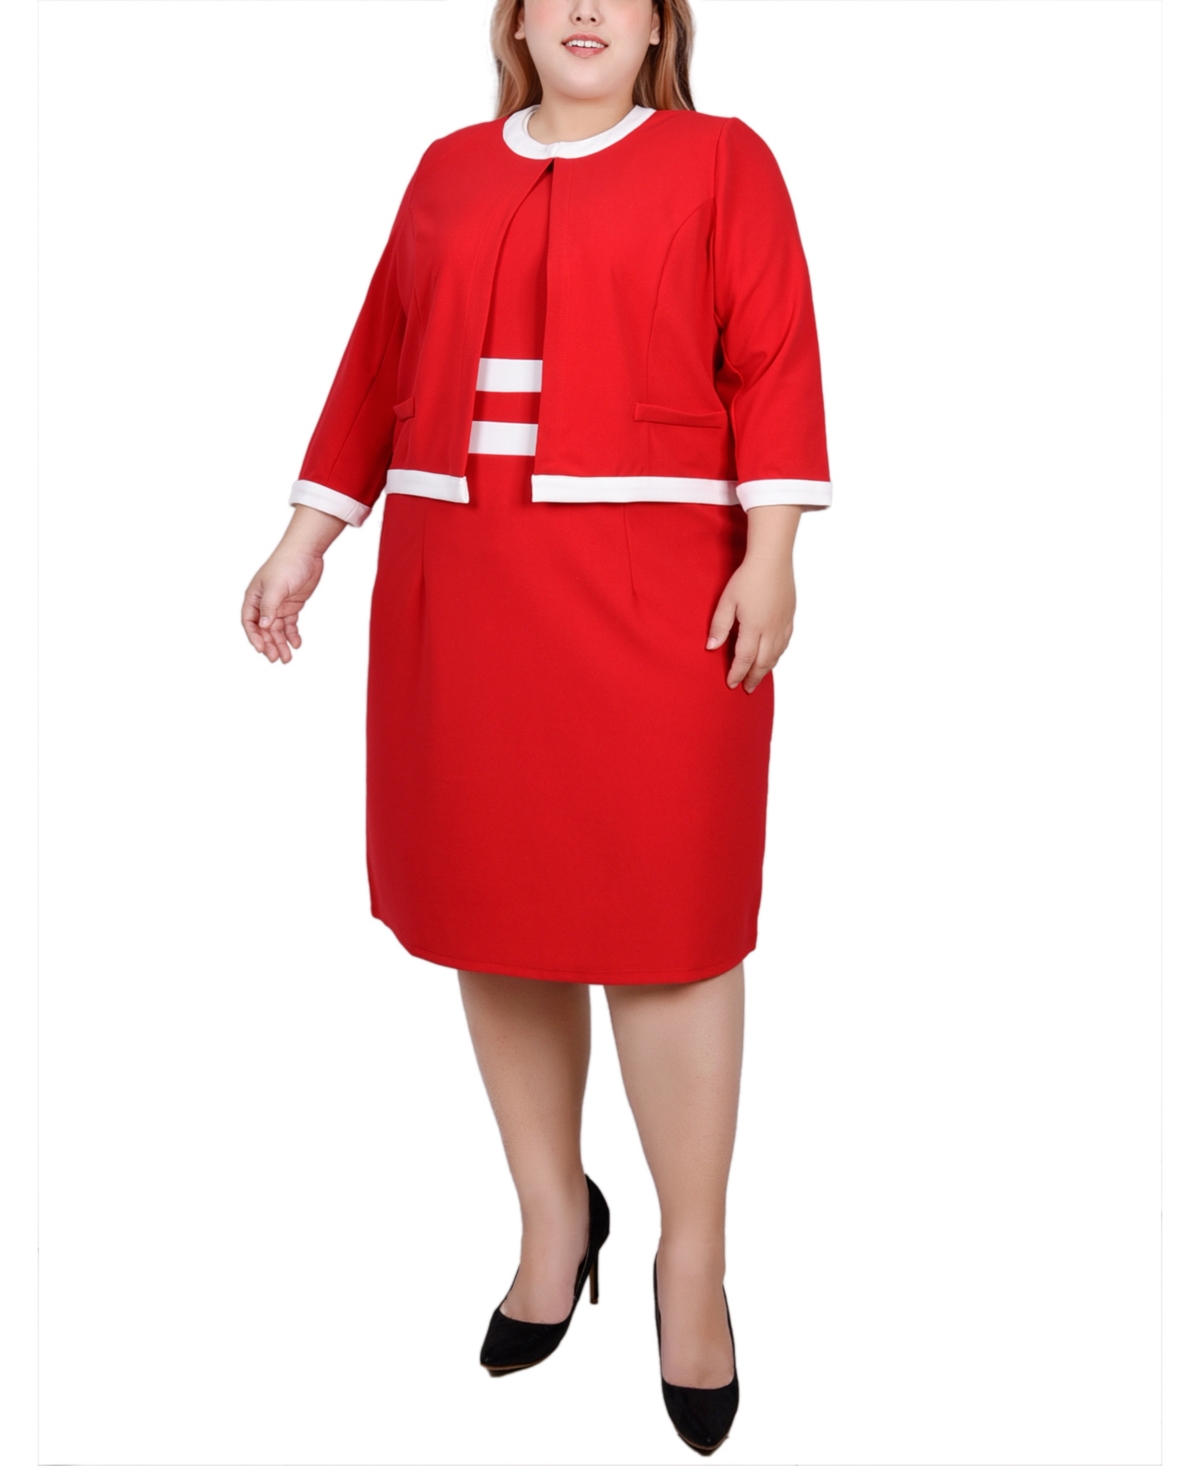 Ny Collection Plus Size Elbow Sleeve Colorblocked Dress, 2 Piece Set In Fire Red White